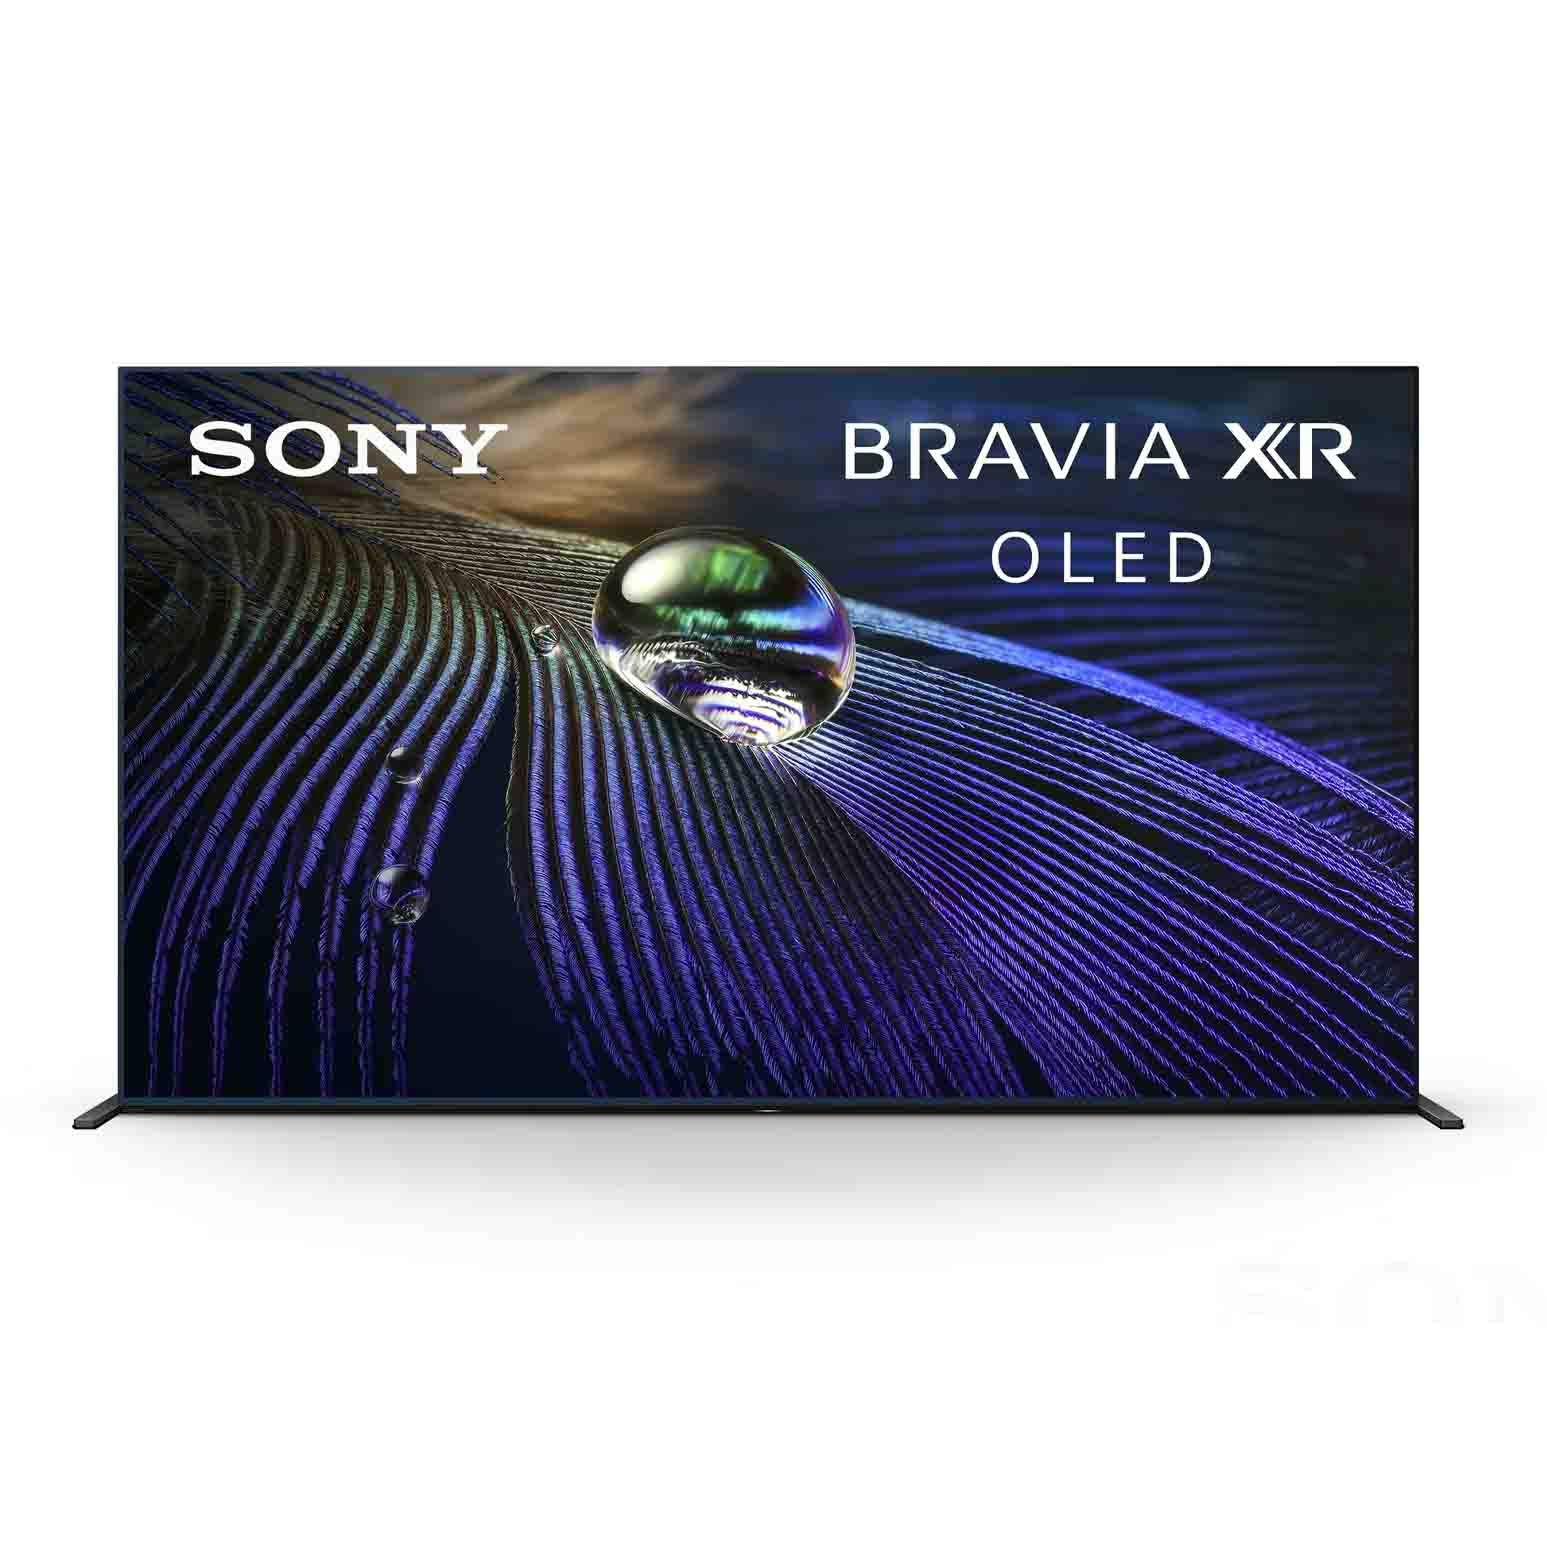 the BRAVIA XR 55-inch Class A90J Google TV in black with a blue and purple screensaver